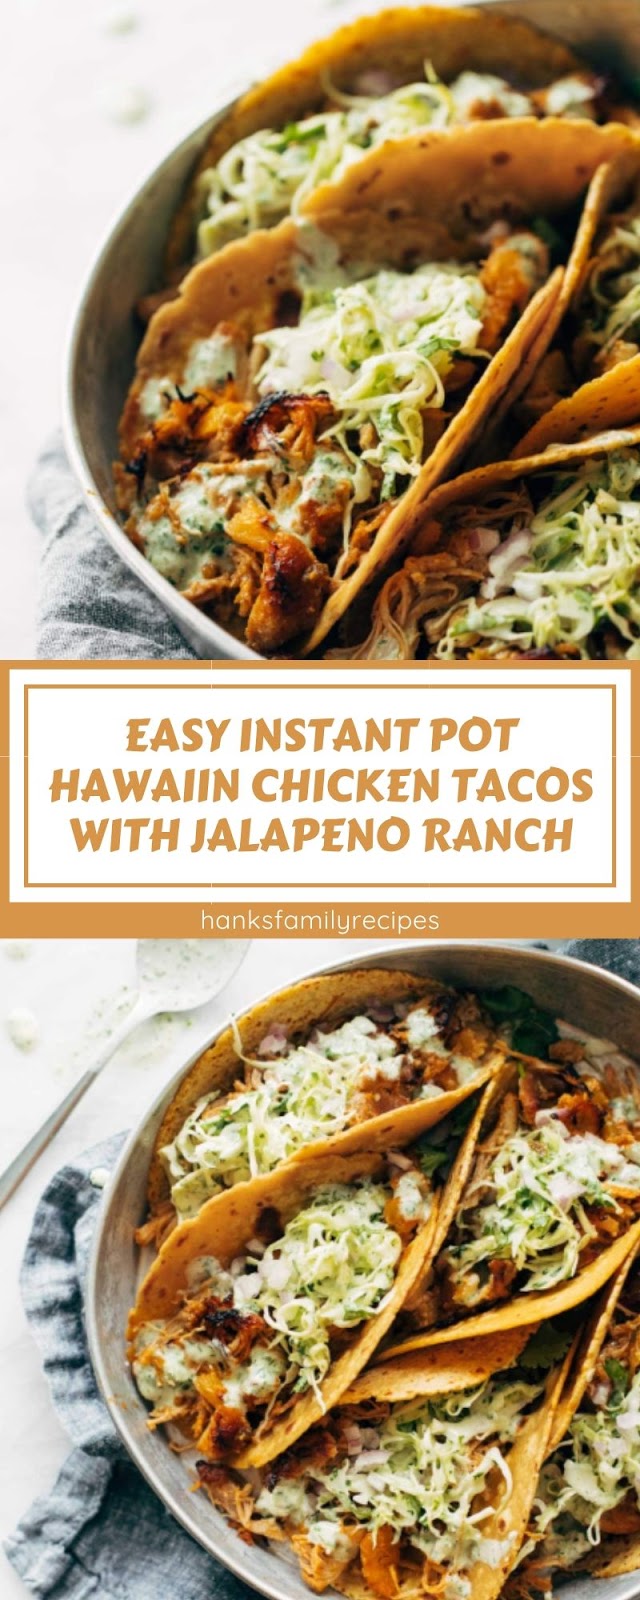 EASY INSTANT POT HAWAIIN CHICKEN TACOS WITH JALAPENO RANCH